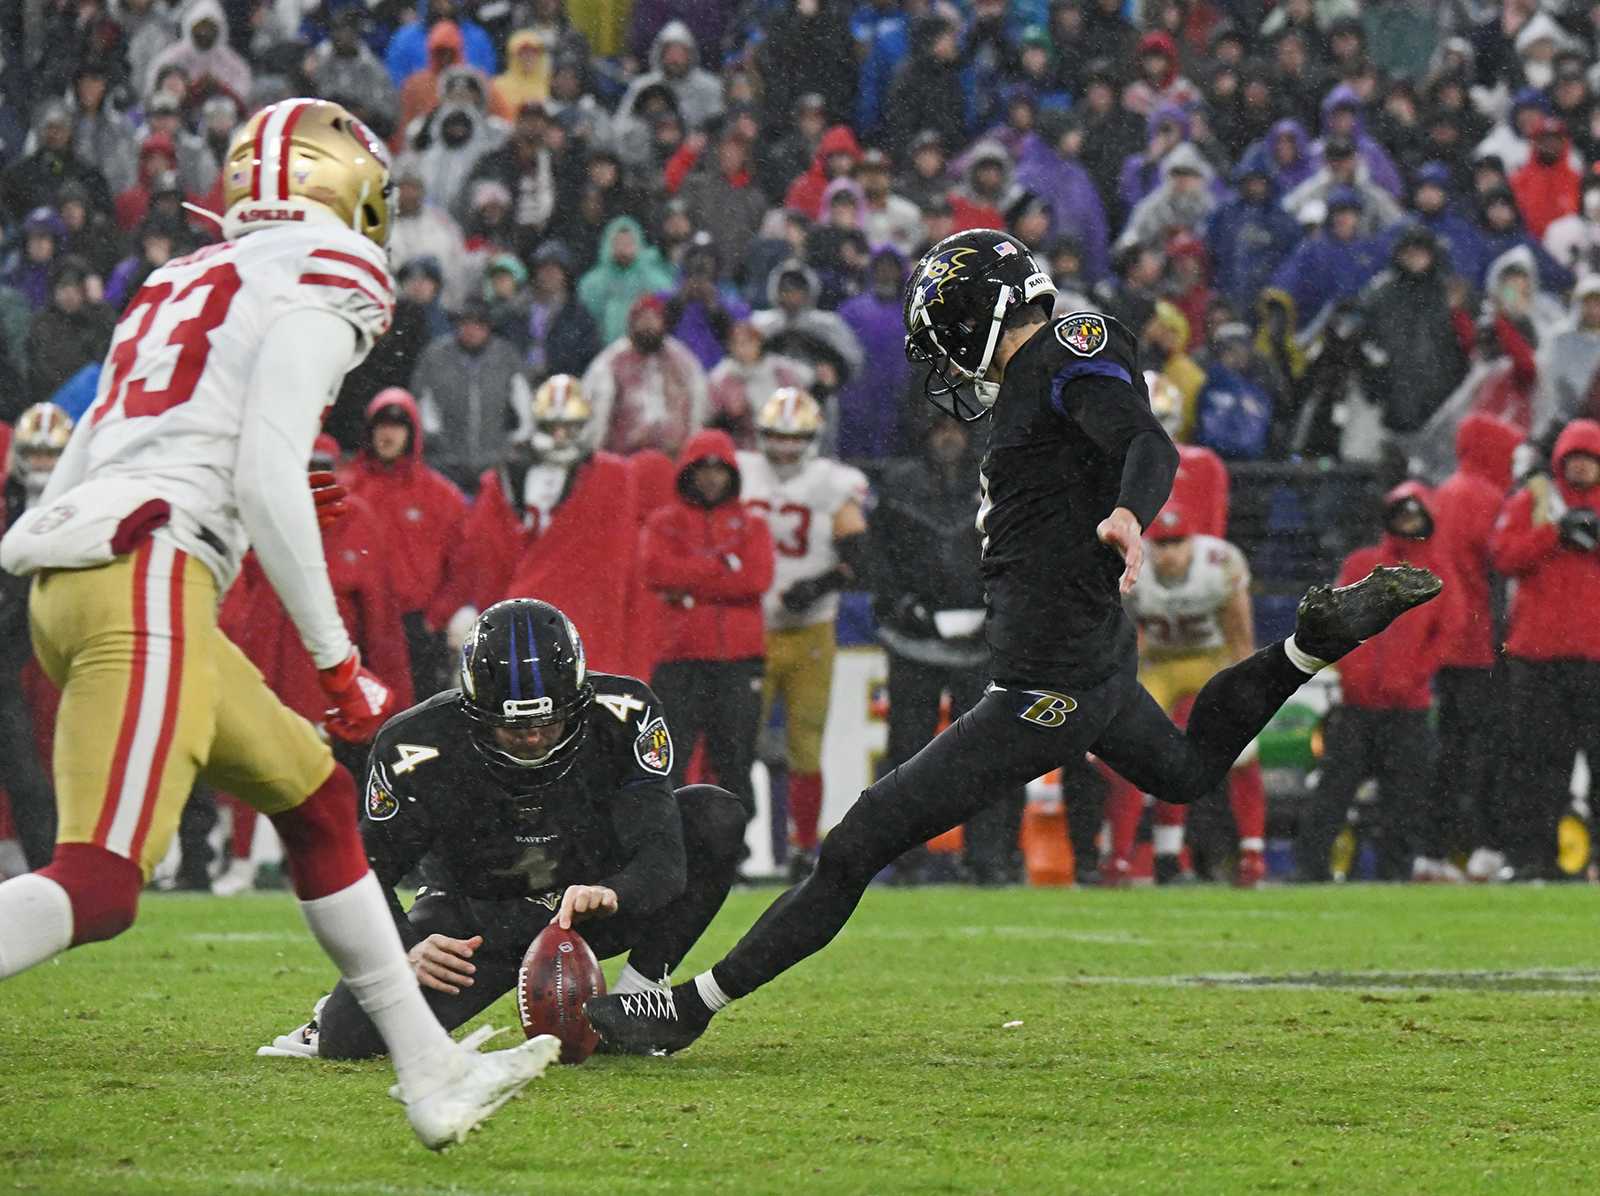 Ravens Justin Tucker, right, kicks the game-winning 49 yards field goal with Sam Koch holding against the 49ers on Dec. 1, 2019. The Ravens defeated the 49ers by score of 20 to 17 at M & T Bank Stadium in Baltimore, Maryland. (Kenneth K. Lam/Baltimore Sun/TNS)